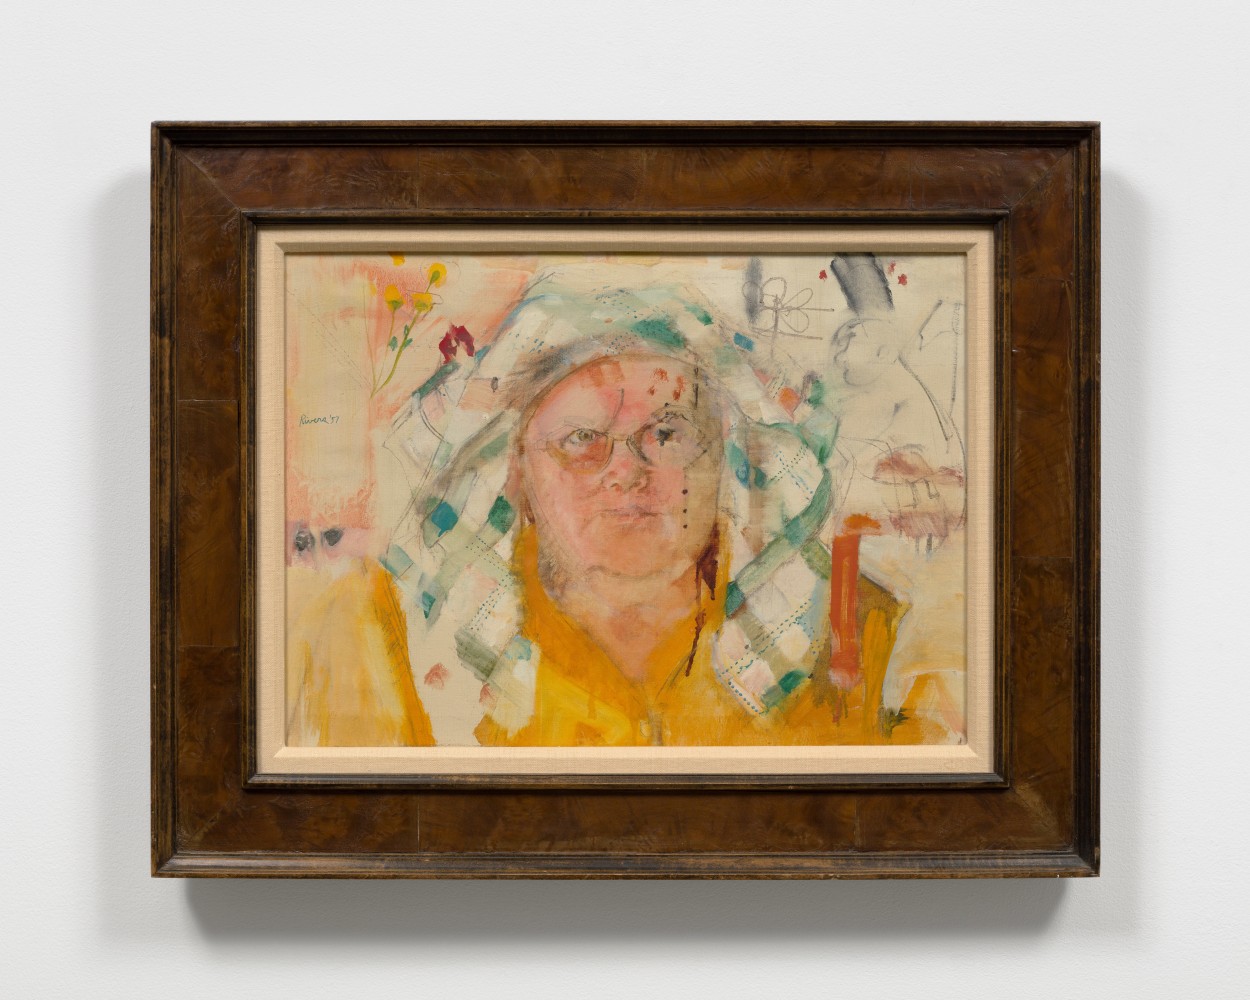 Framed oil on canvas work by Larry Rivers featuring the head of woman in a yellow shirt with a green checkered scarf around her head